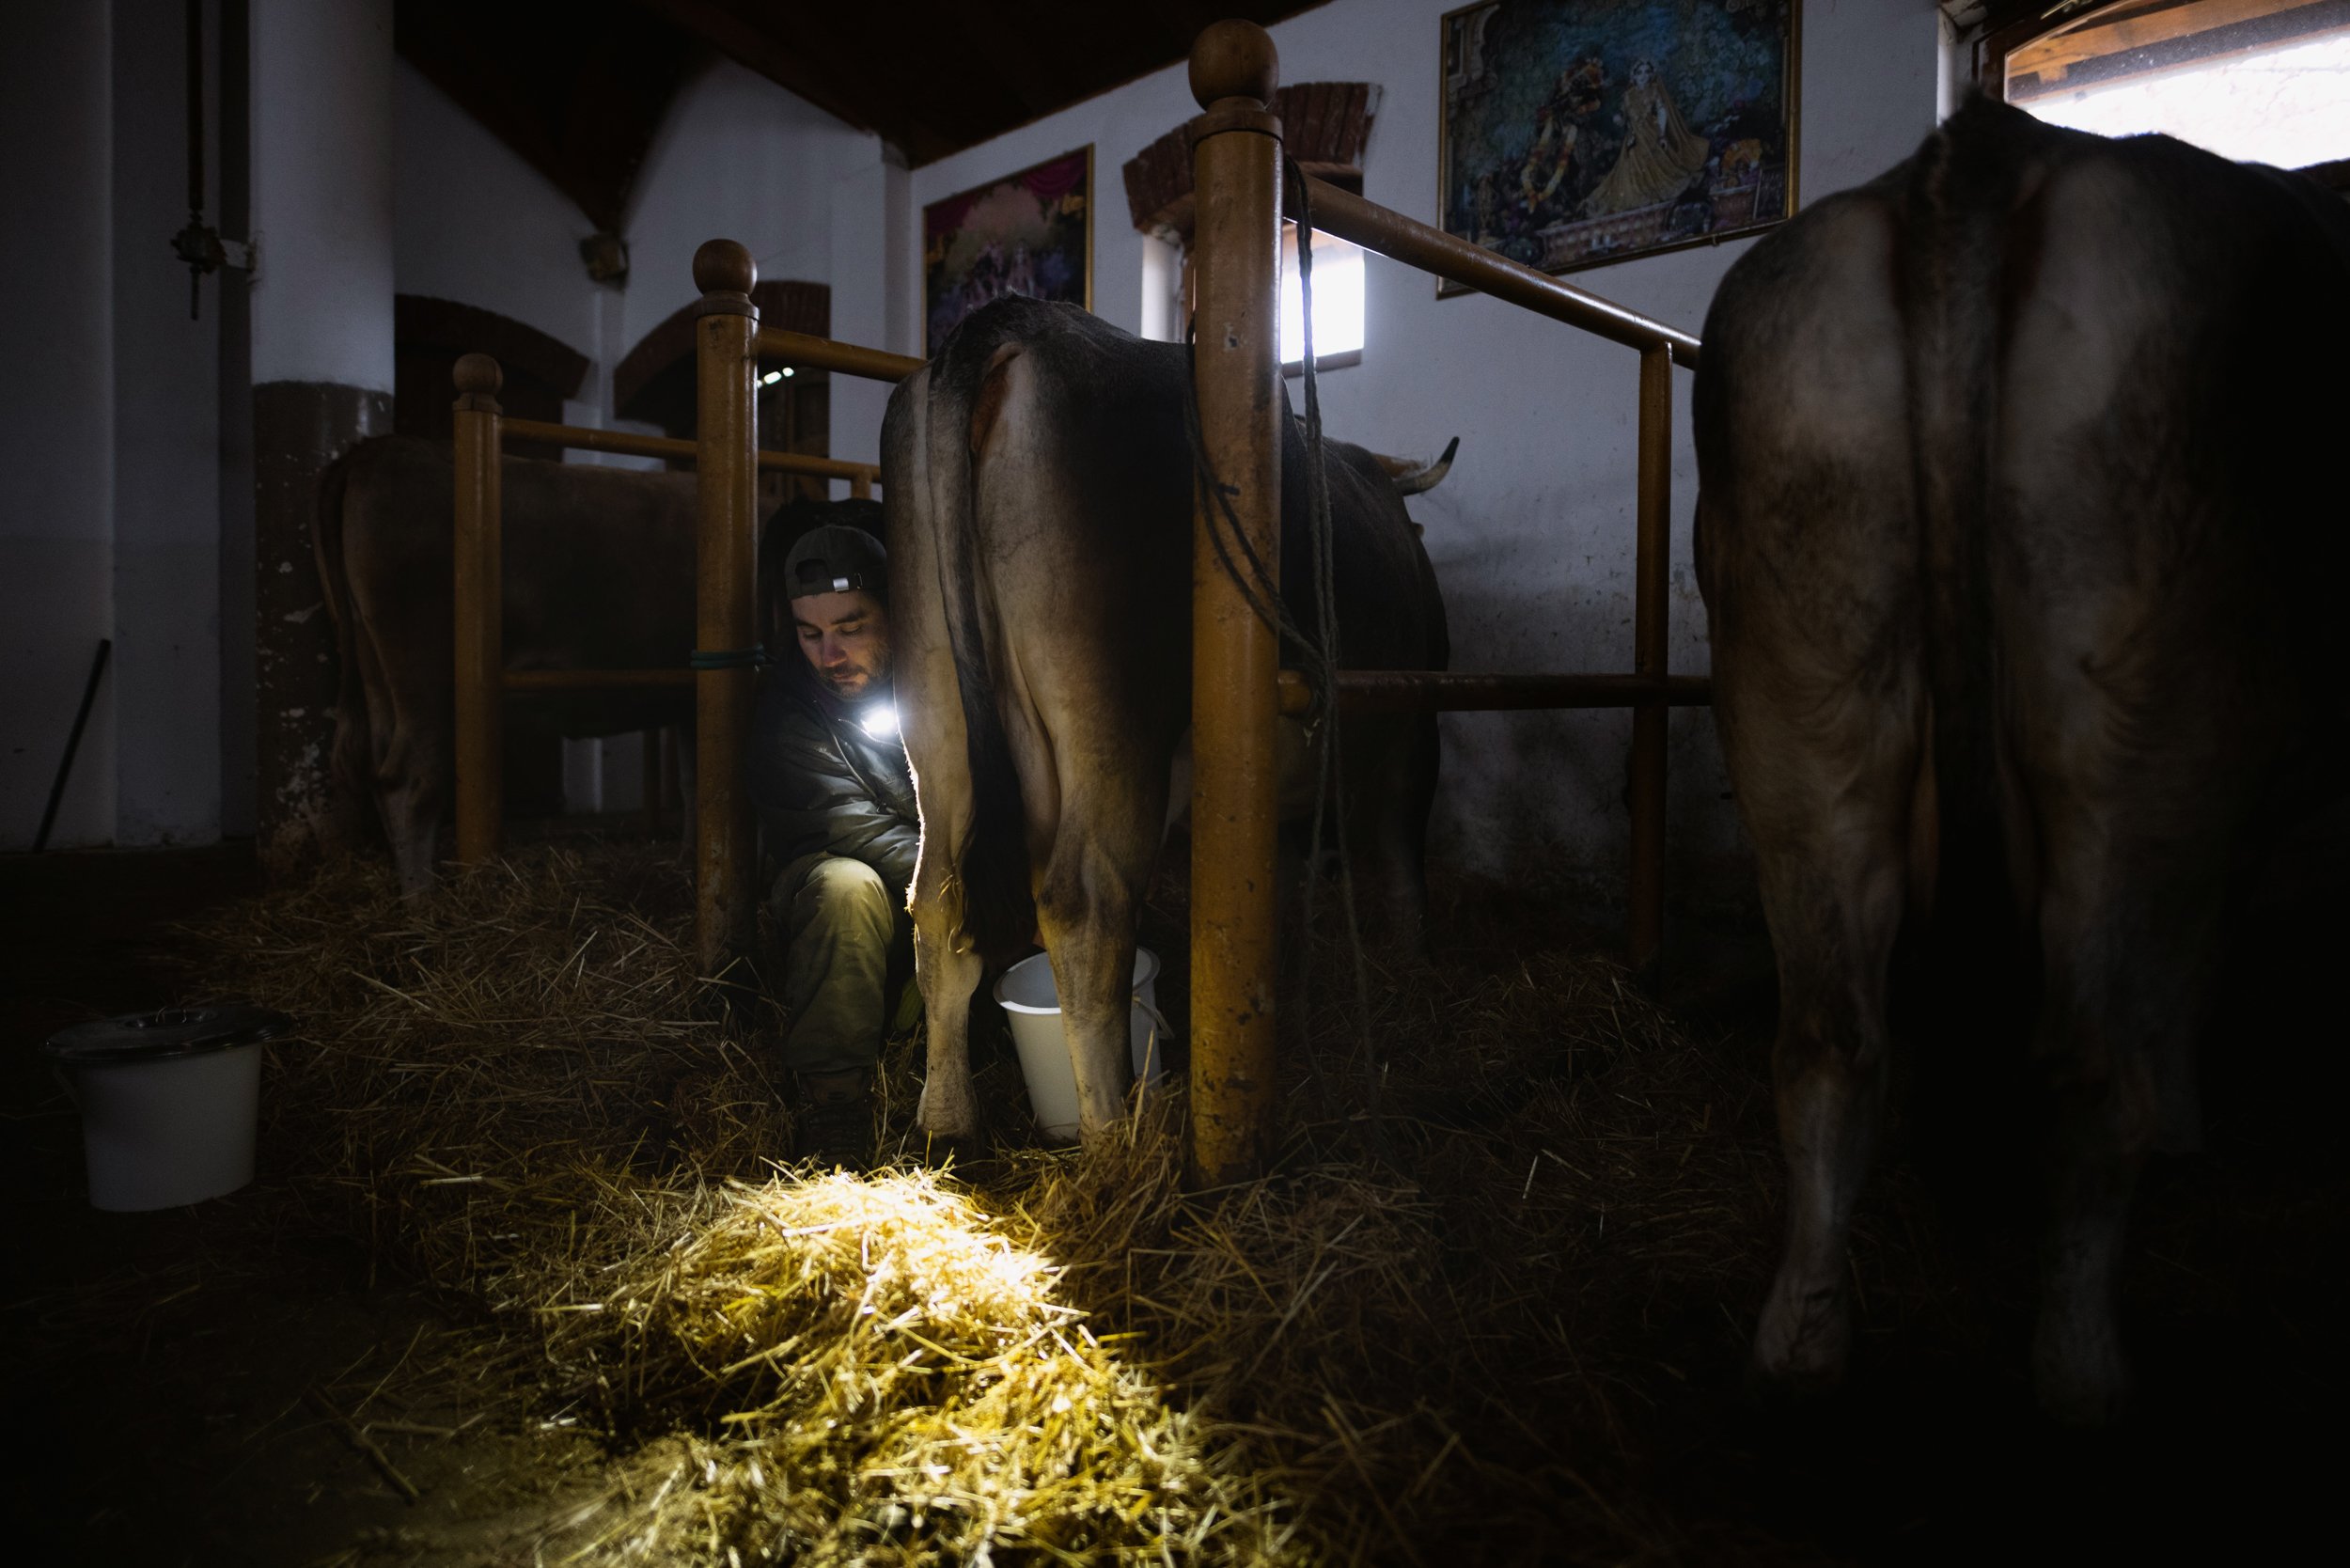  A bhakta (Krishna conscious believer) milking cows by the light of a headlamp on January 16, 2023, in the Krishna Valley, Somogyvámos. The vegetarian community cares for animals for their milk. All cattle have a name and are not sent to the slaughte